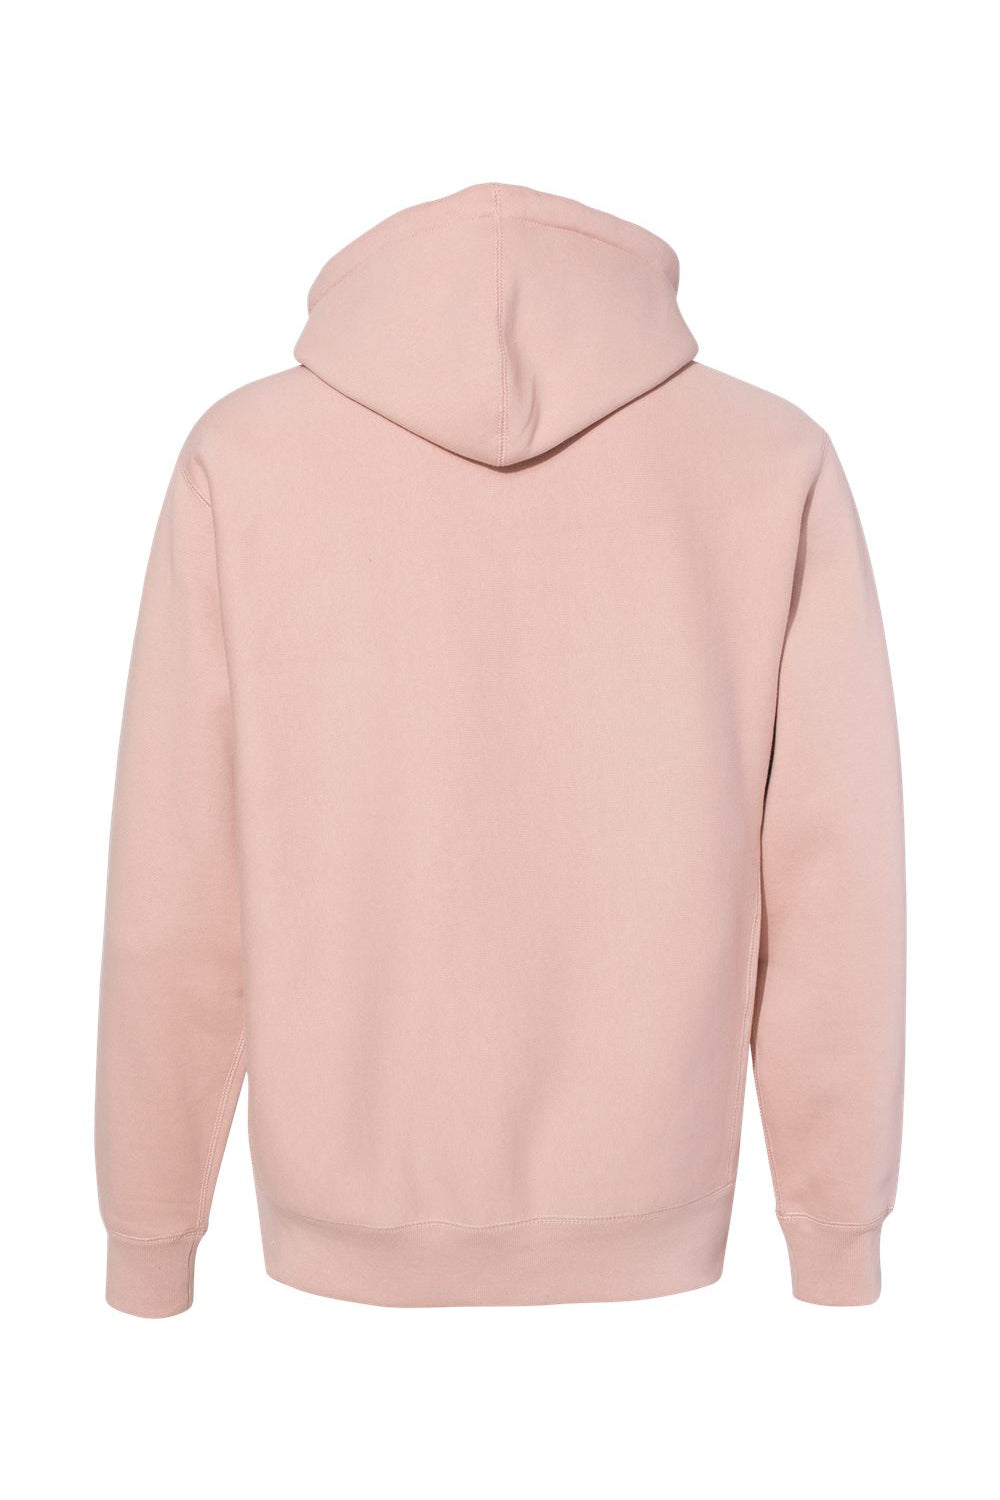 Independent Trading Co. IND5000P Mens Legend Hooded Sweatshirt Hoodie Dusty Pink Flat Back